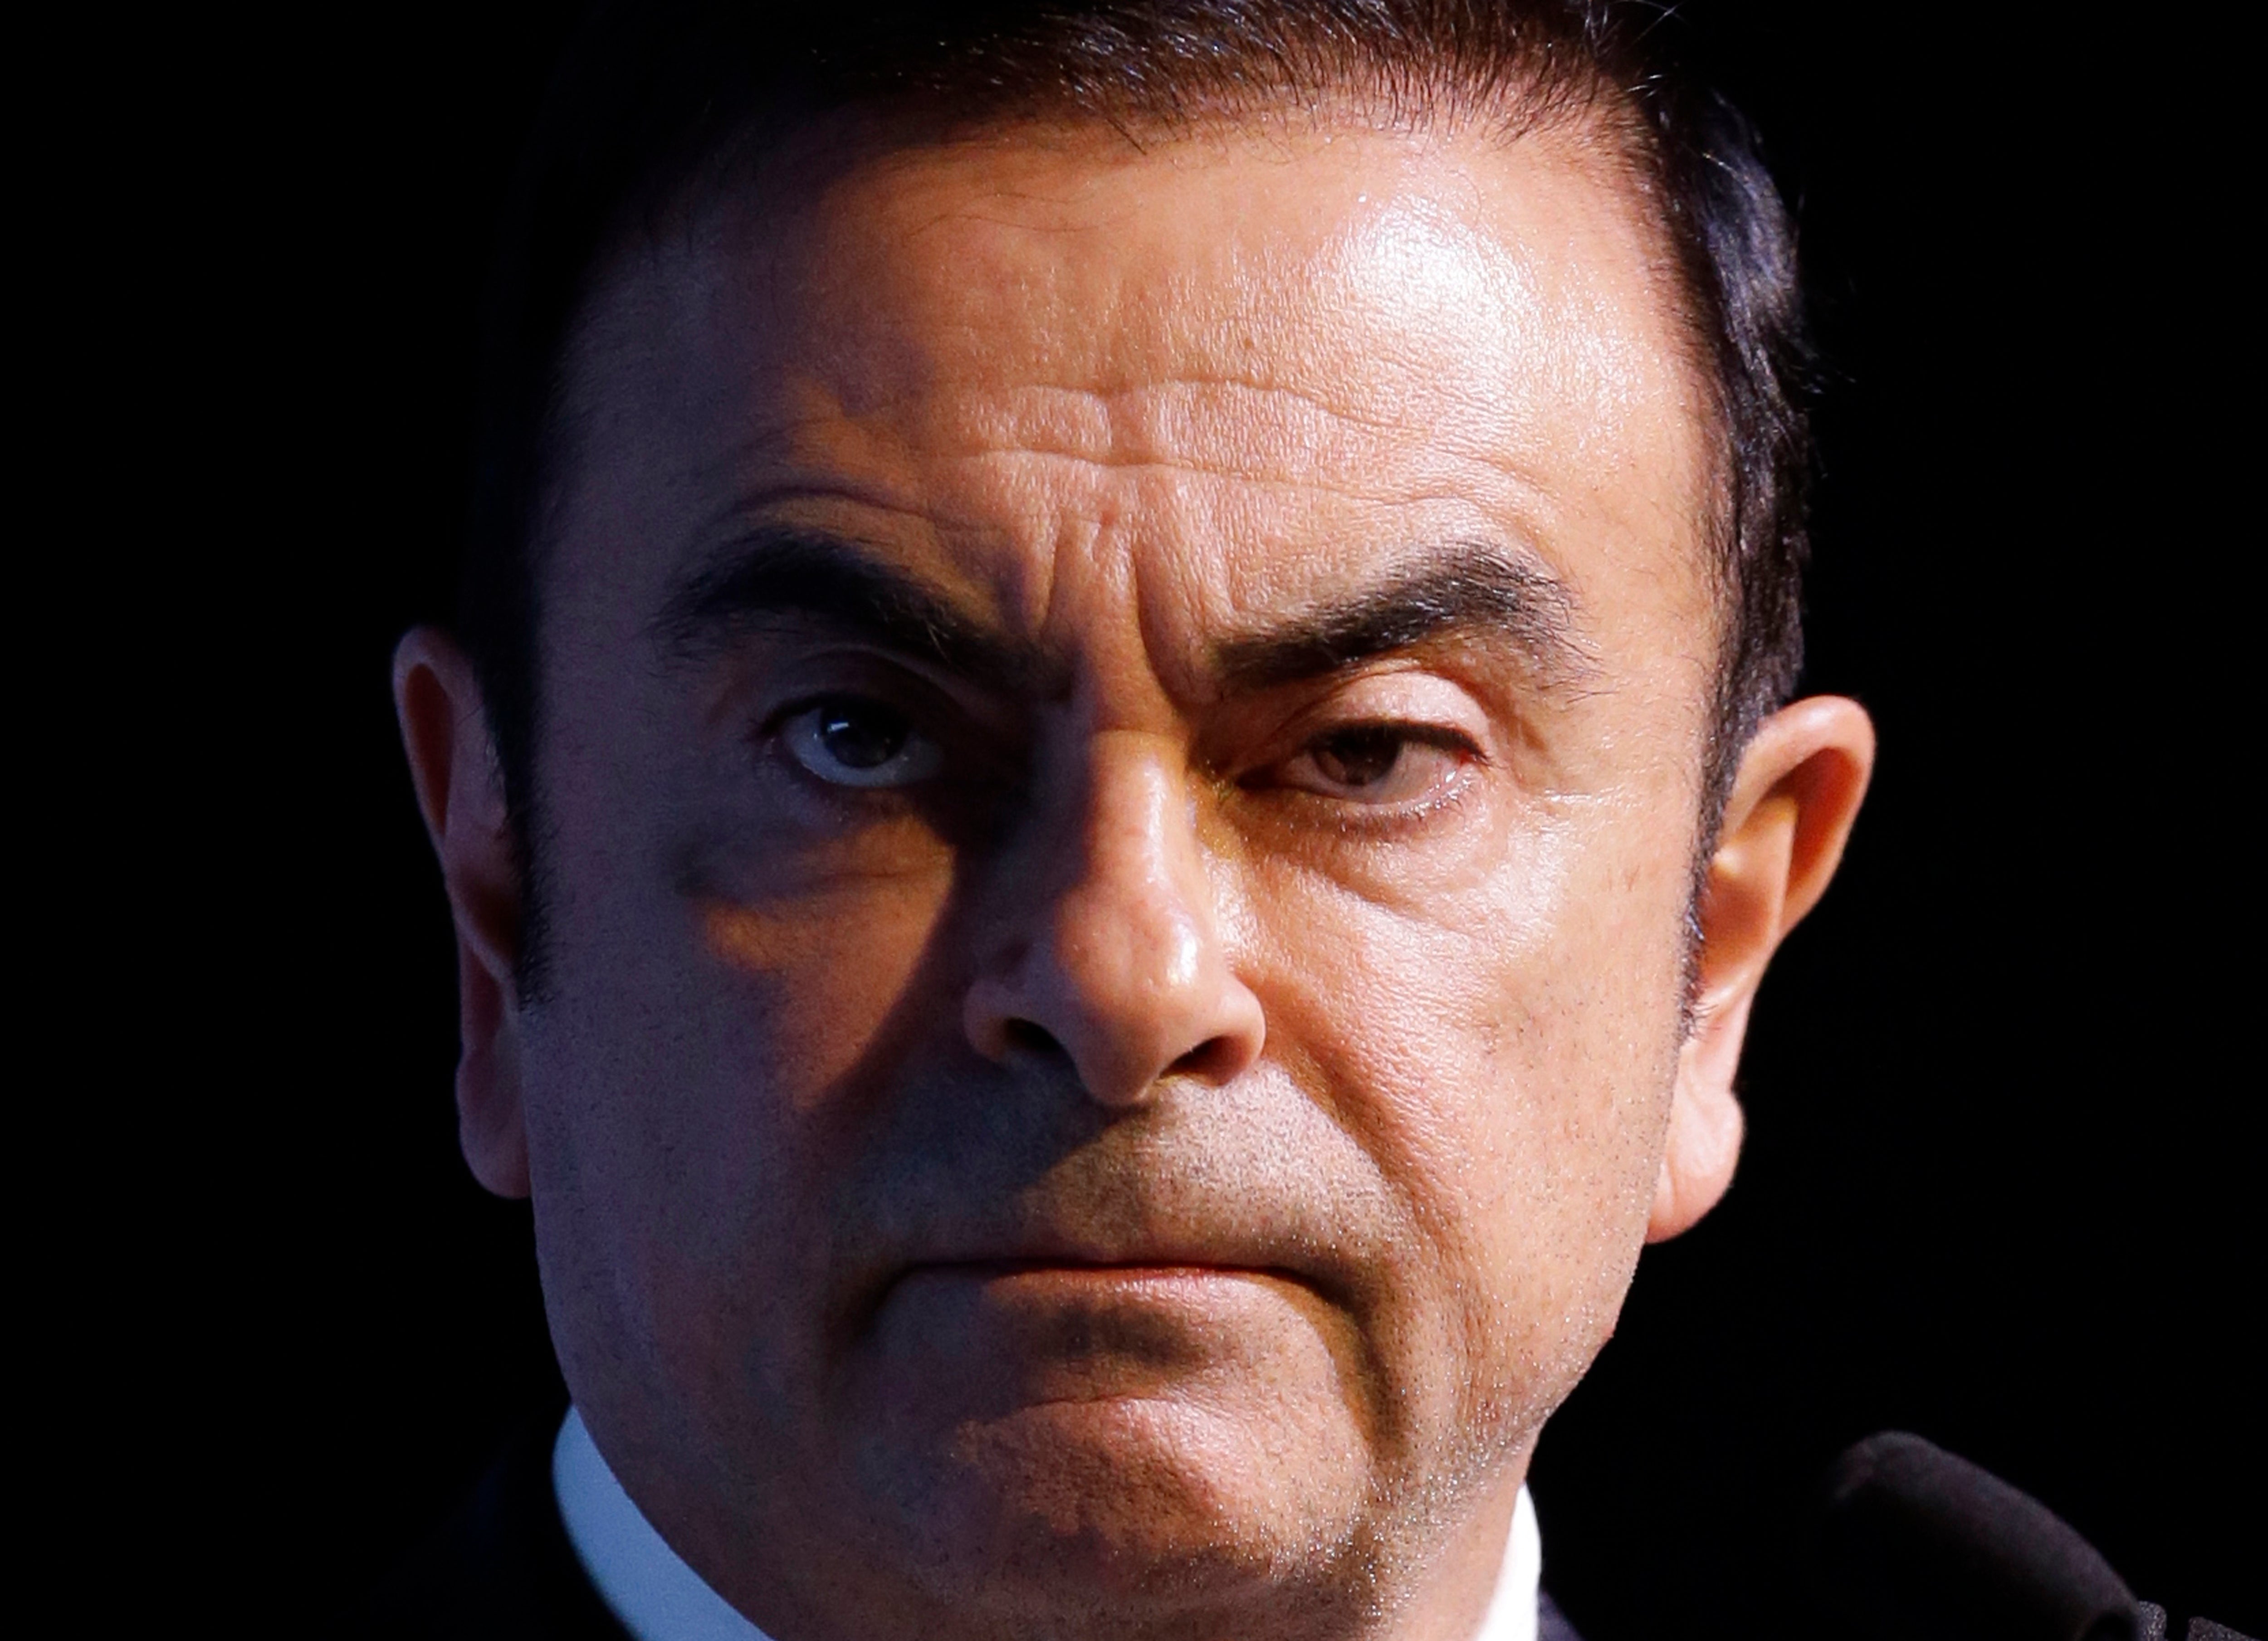 Ghosn was arrested in Japan in November 2018 on accusations of financial misconduct and fled to Lebanon a year later, hidden in a box in the hold of a private jet.